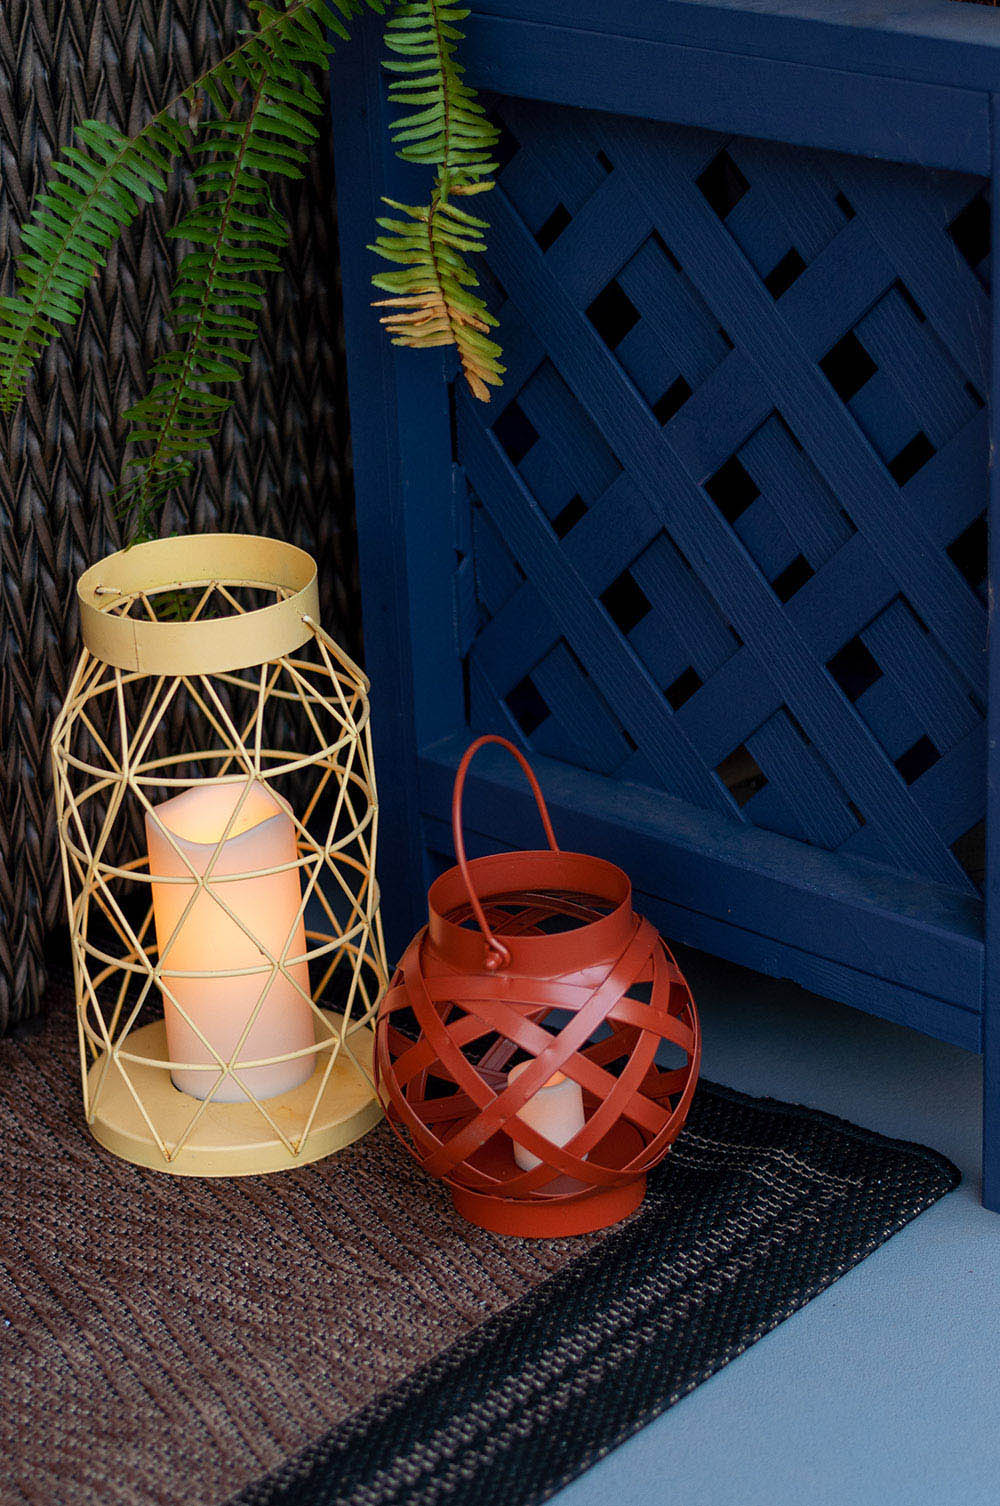 A tall yellow lantern and short red lantern filled with flameless LED candles.